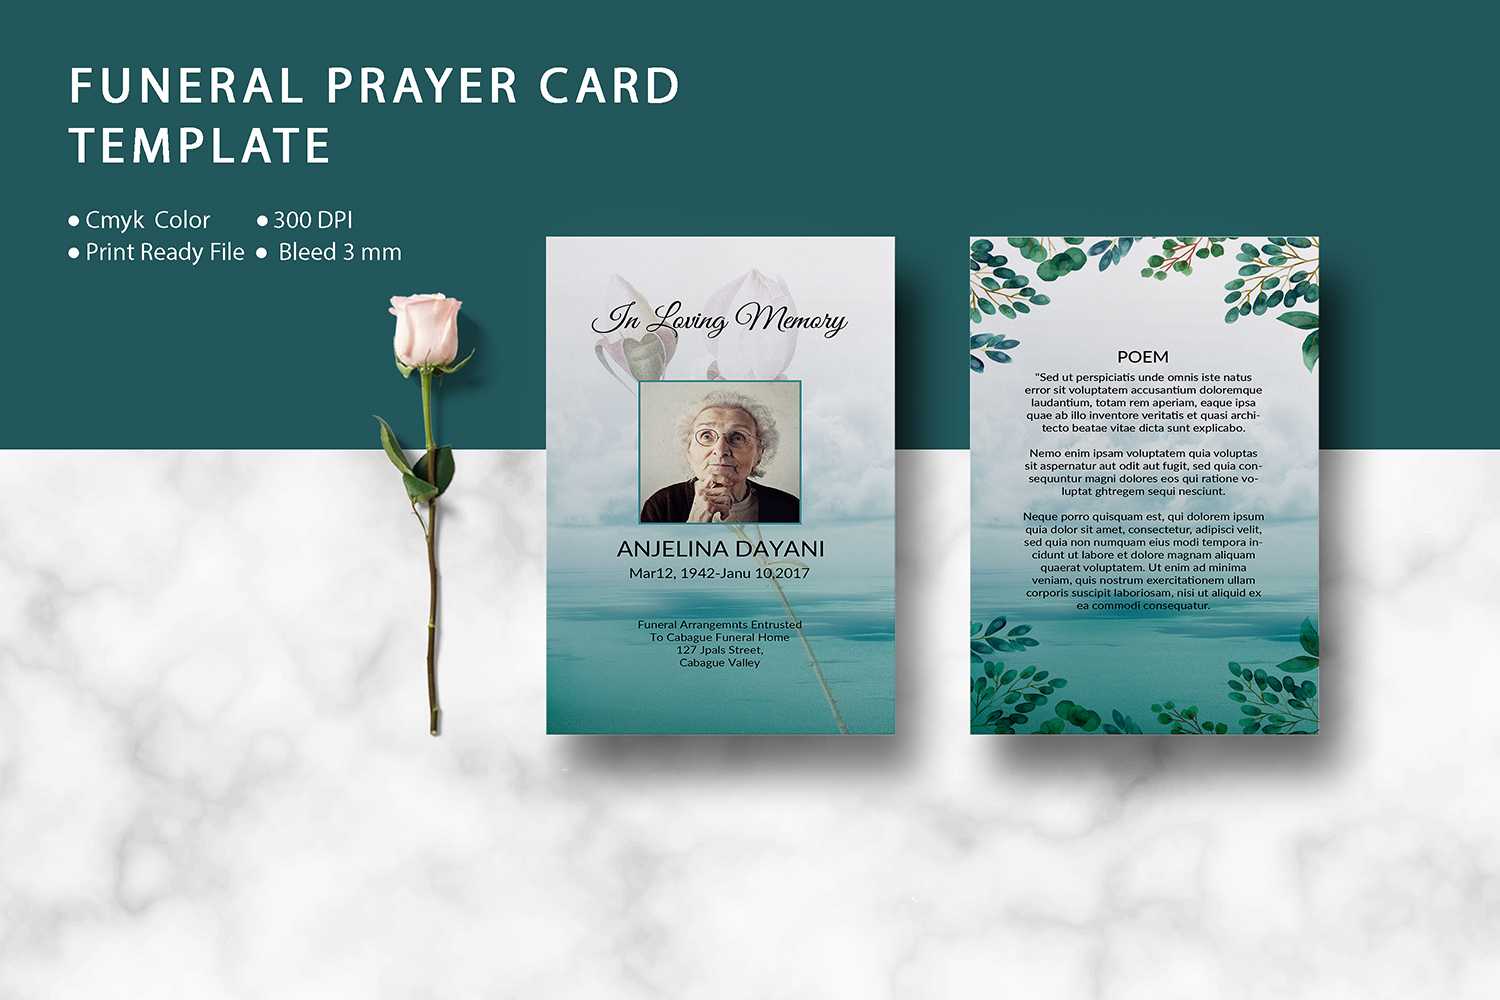 Funeral Prayer Card Template, Ms Word & Photoshop Template With Prayer Card Template For Word